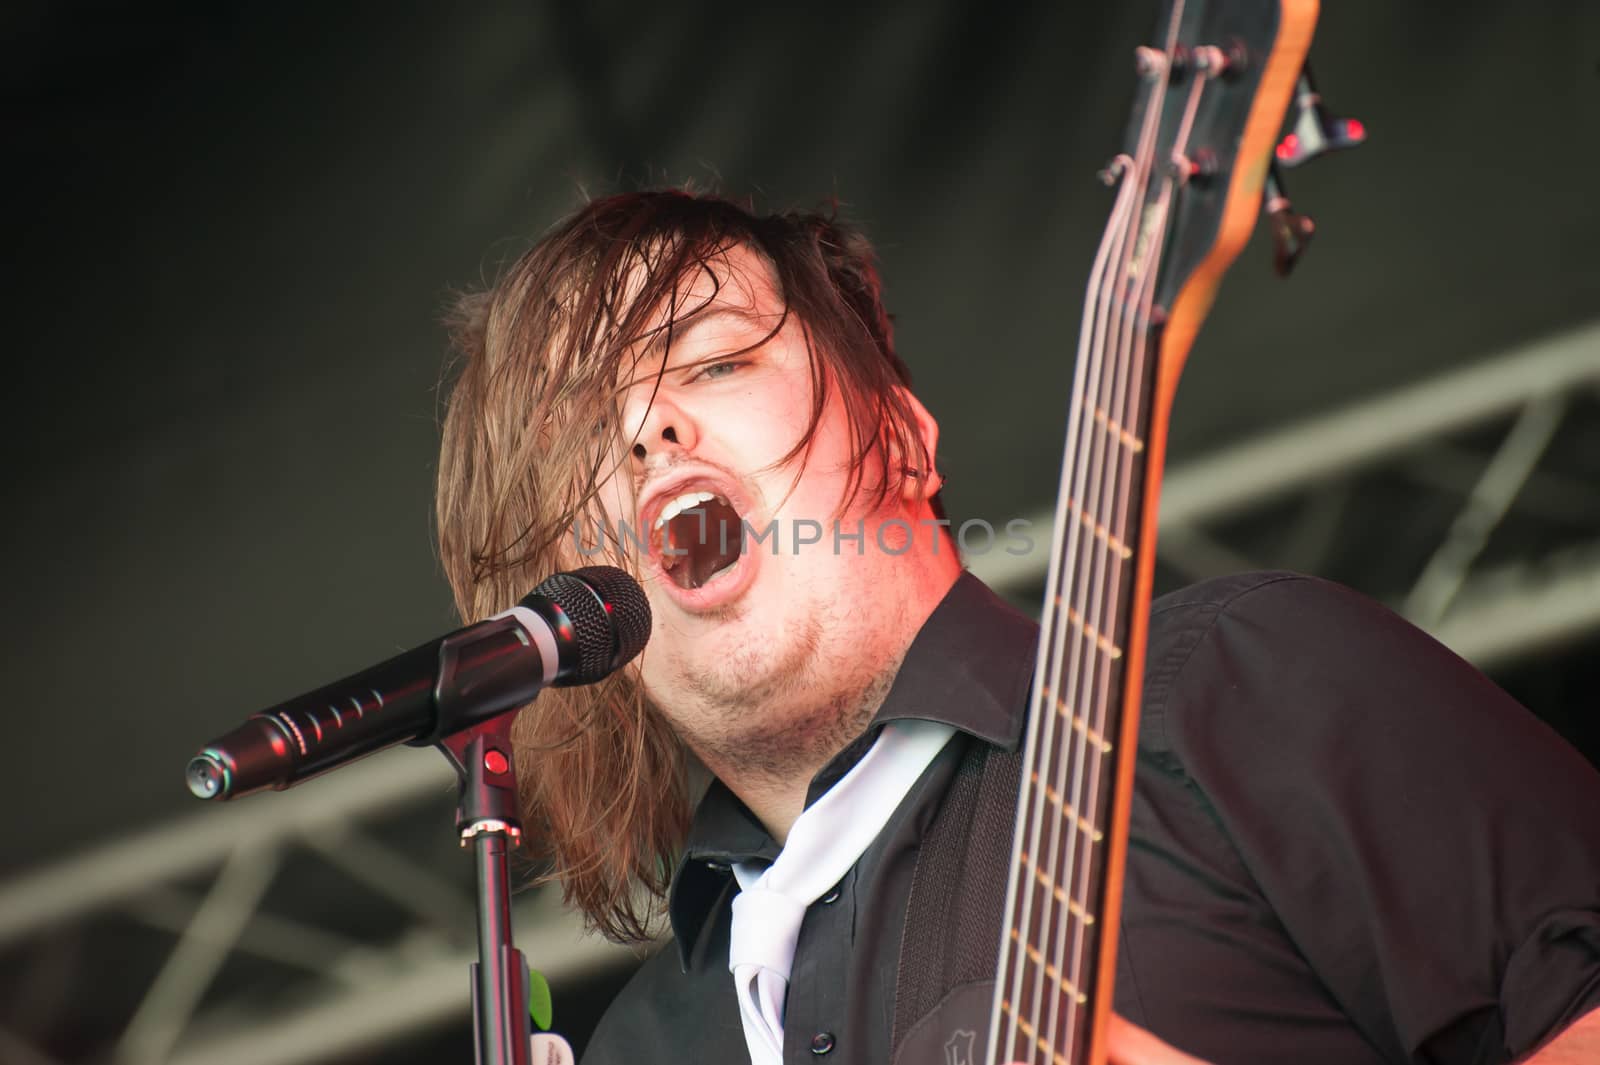 Yateley, UK - June 30, 2012: Carl Dawkins, crazy bassist with British rock band The Chilli Fighters performing at the GOTG Festival in Yateley, UK